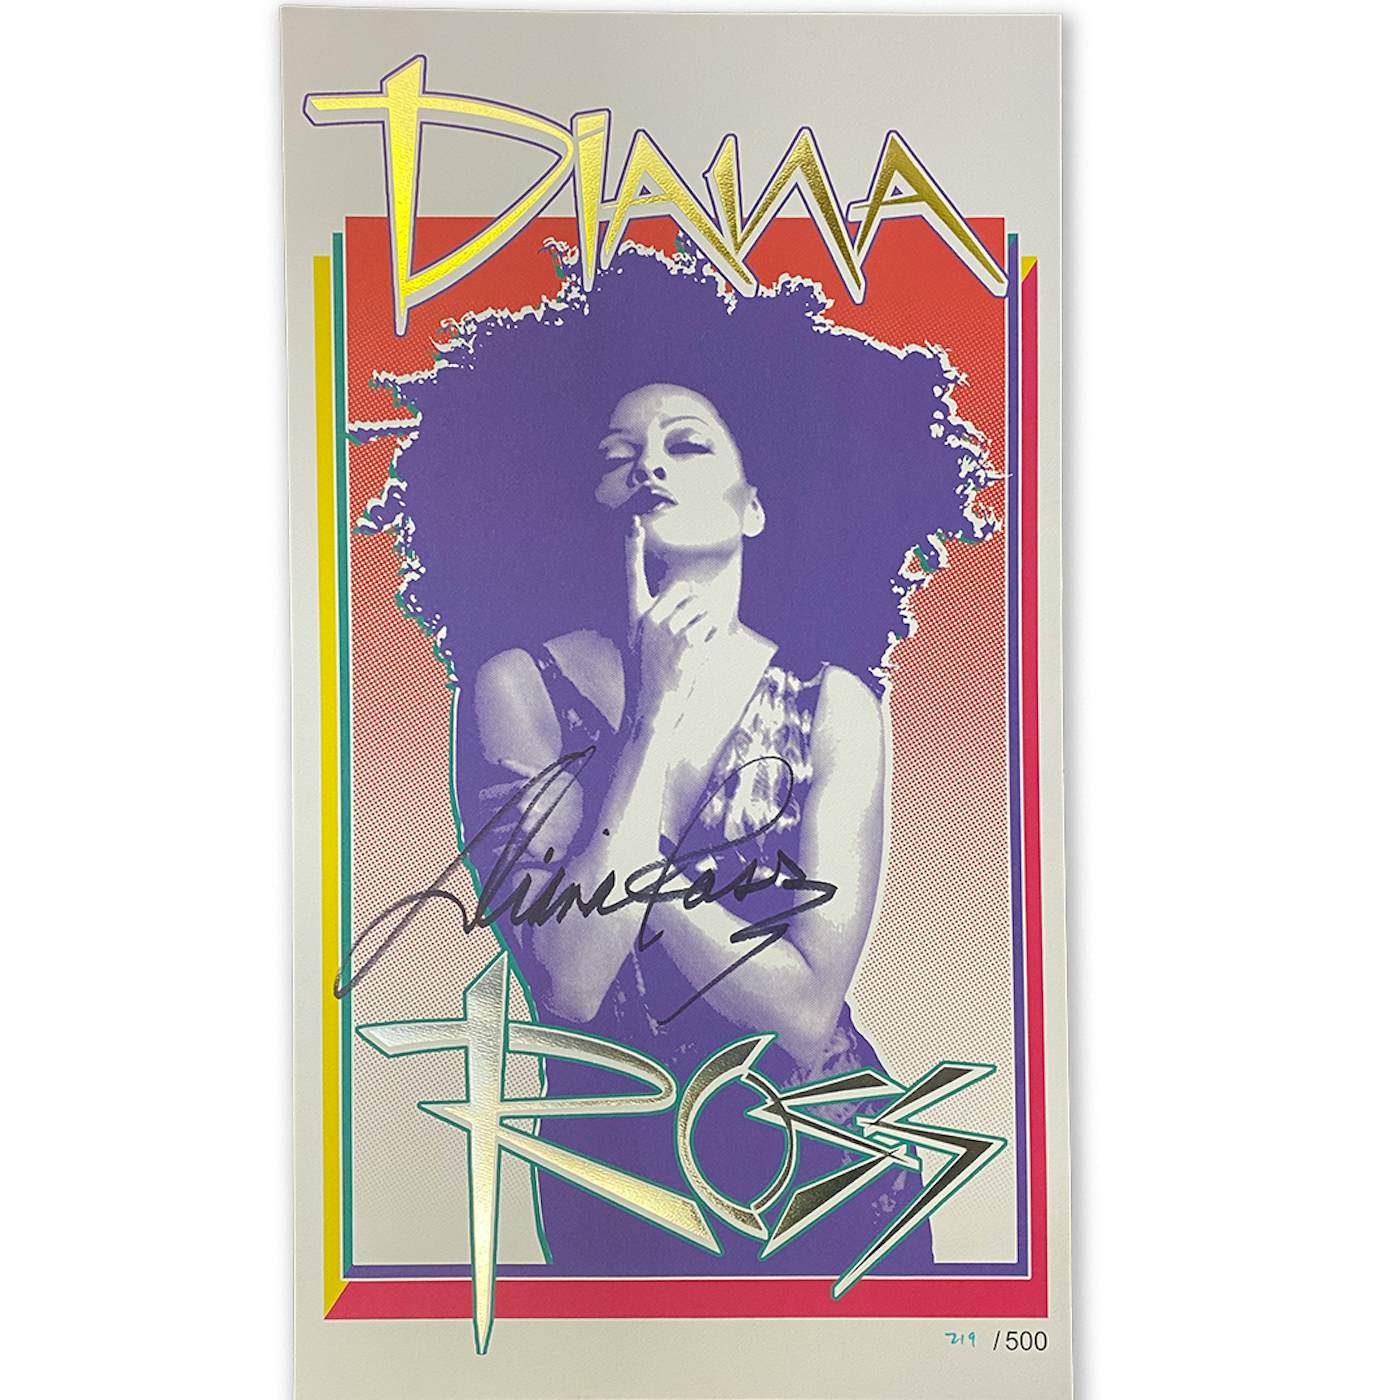 Diana Ross "Cover Page Gold/Silver" AUTOGRAPHED Limited Edition Poster